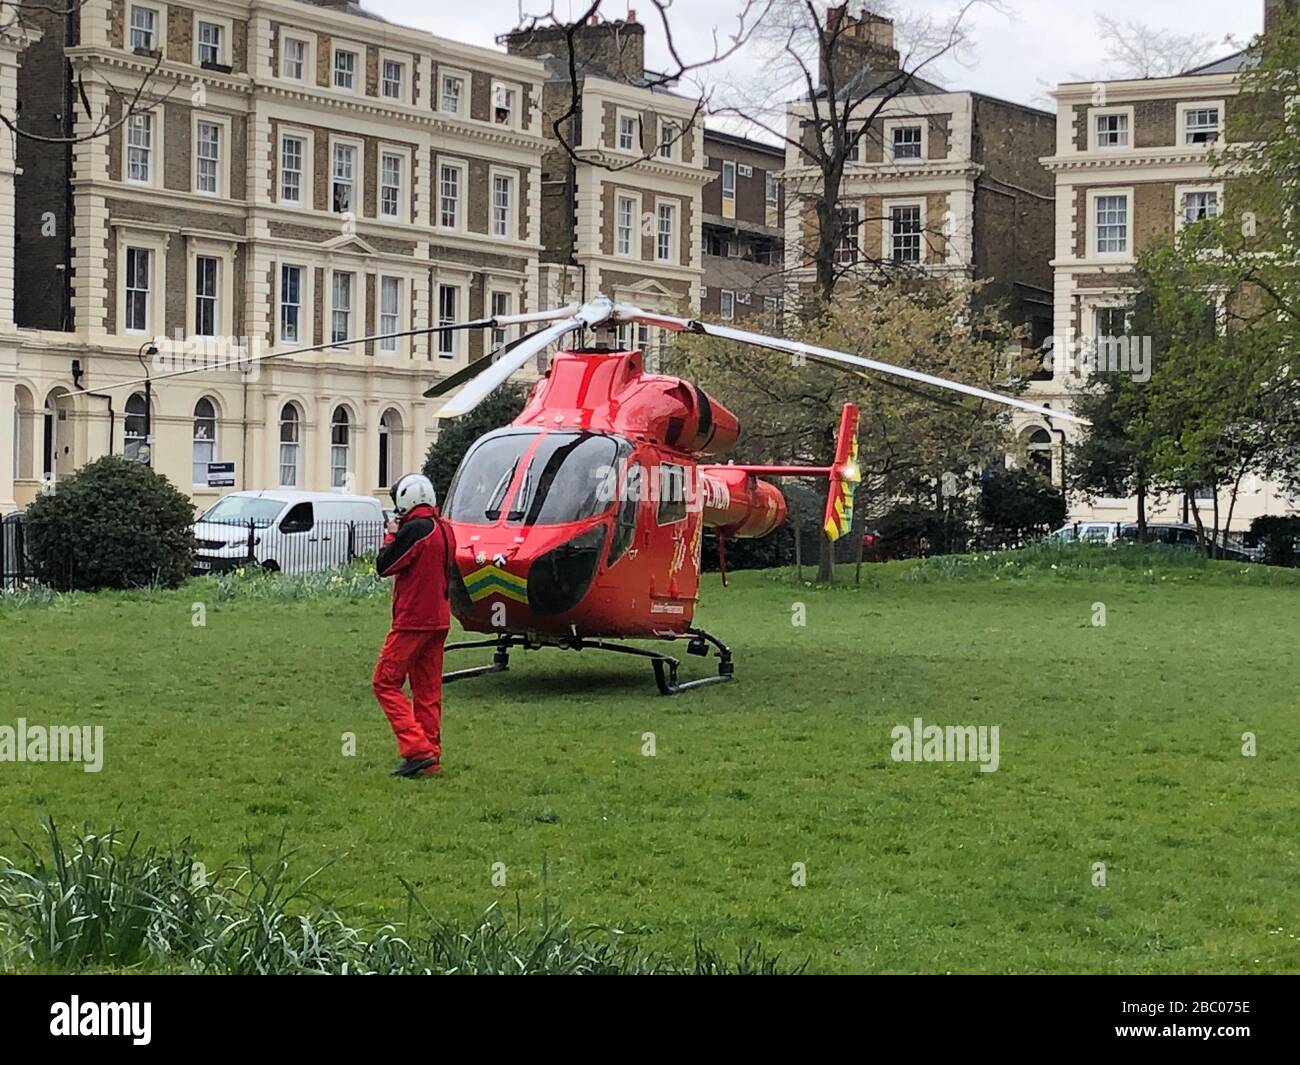 London, UK. 1st April 2020. London's air ambulance G-LNDN helicopter lands in Albert Square green area. Stock Photo